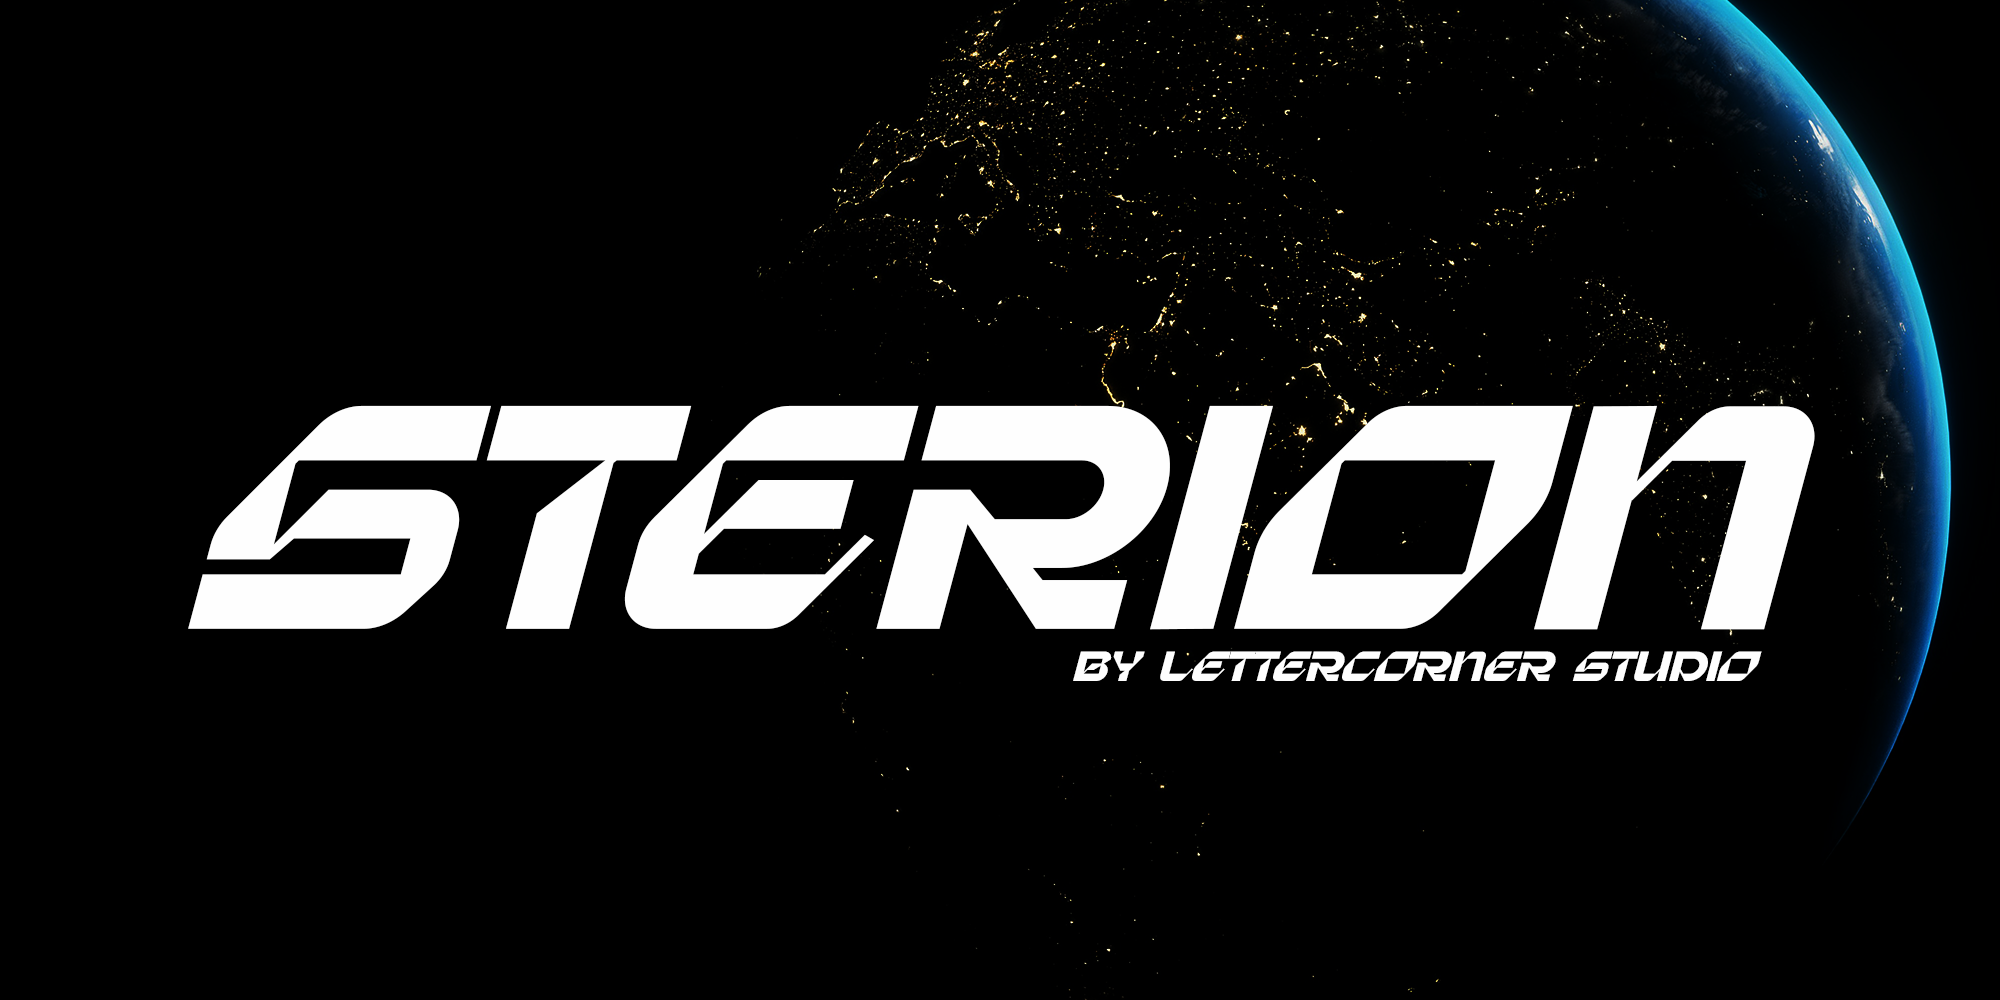 Sterion